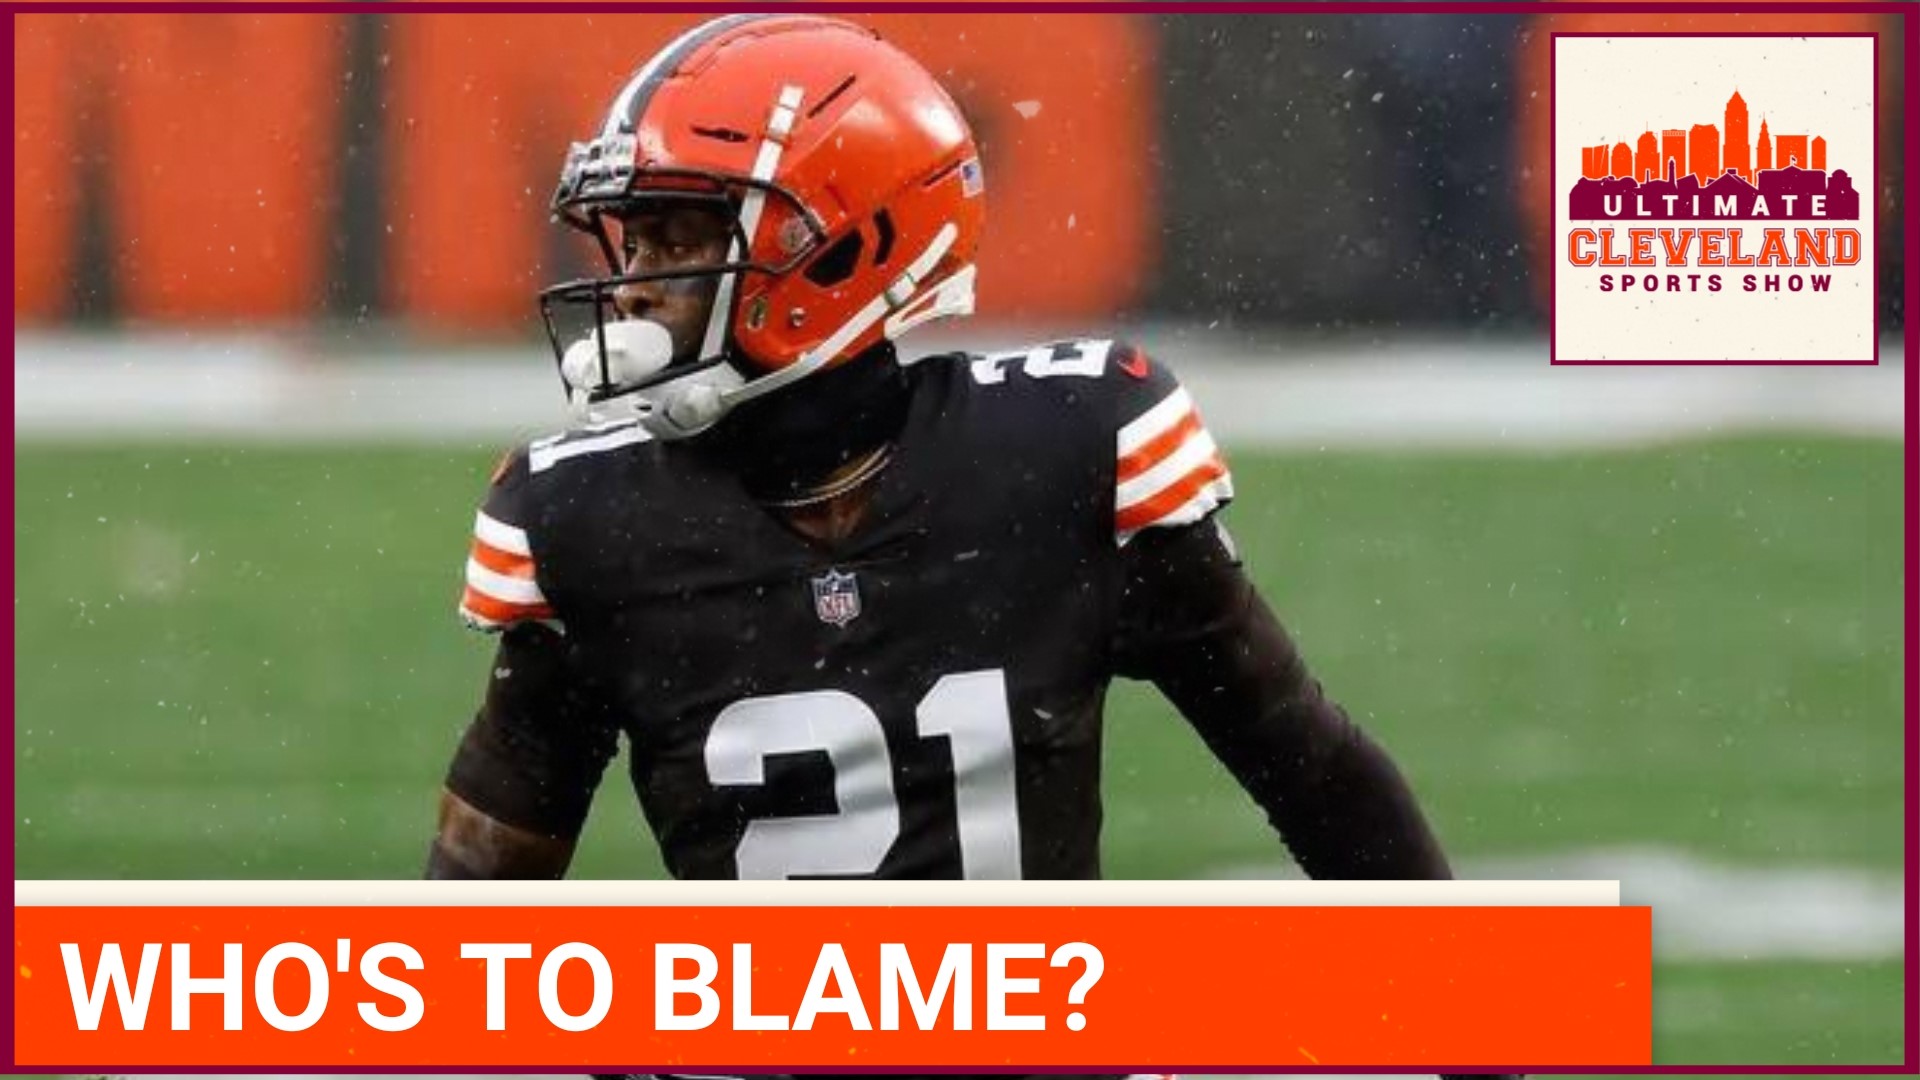 The Cleveland Browns held a 13 point lead with less than 2 minutes to go in the game, and somehow lost 31-30. Who's at fault?